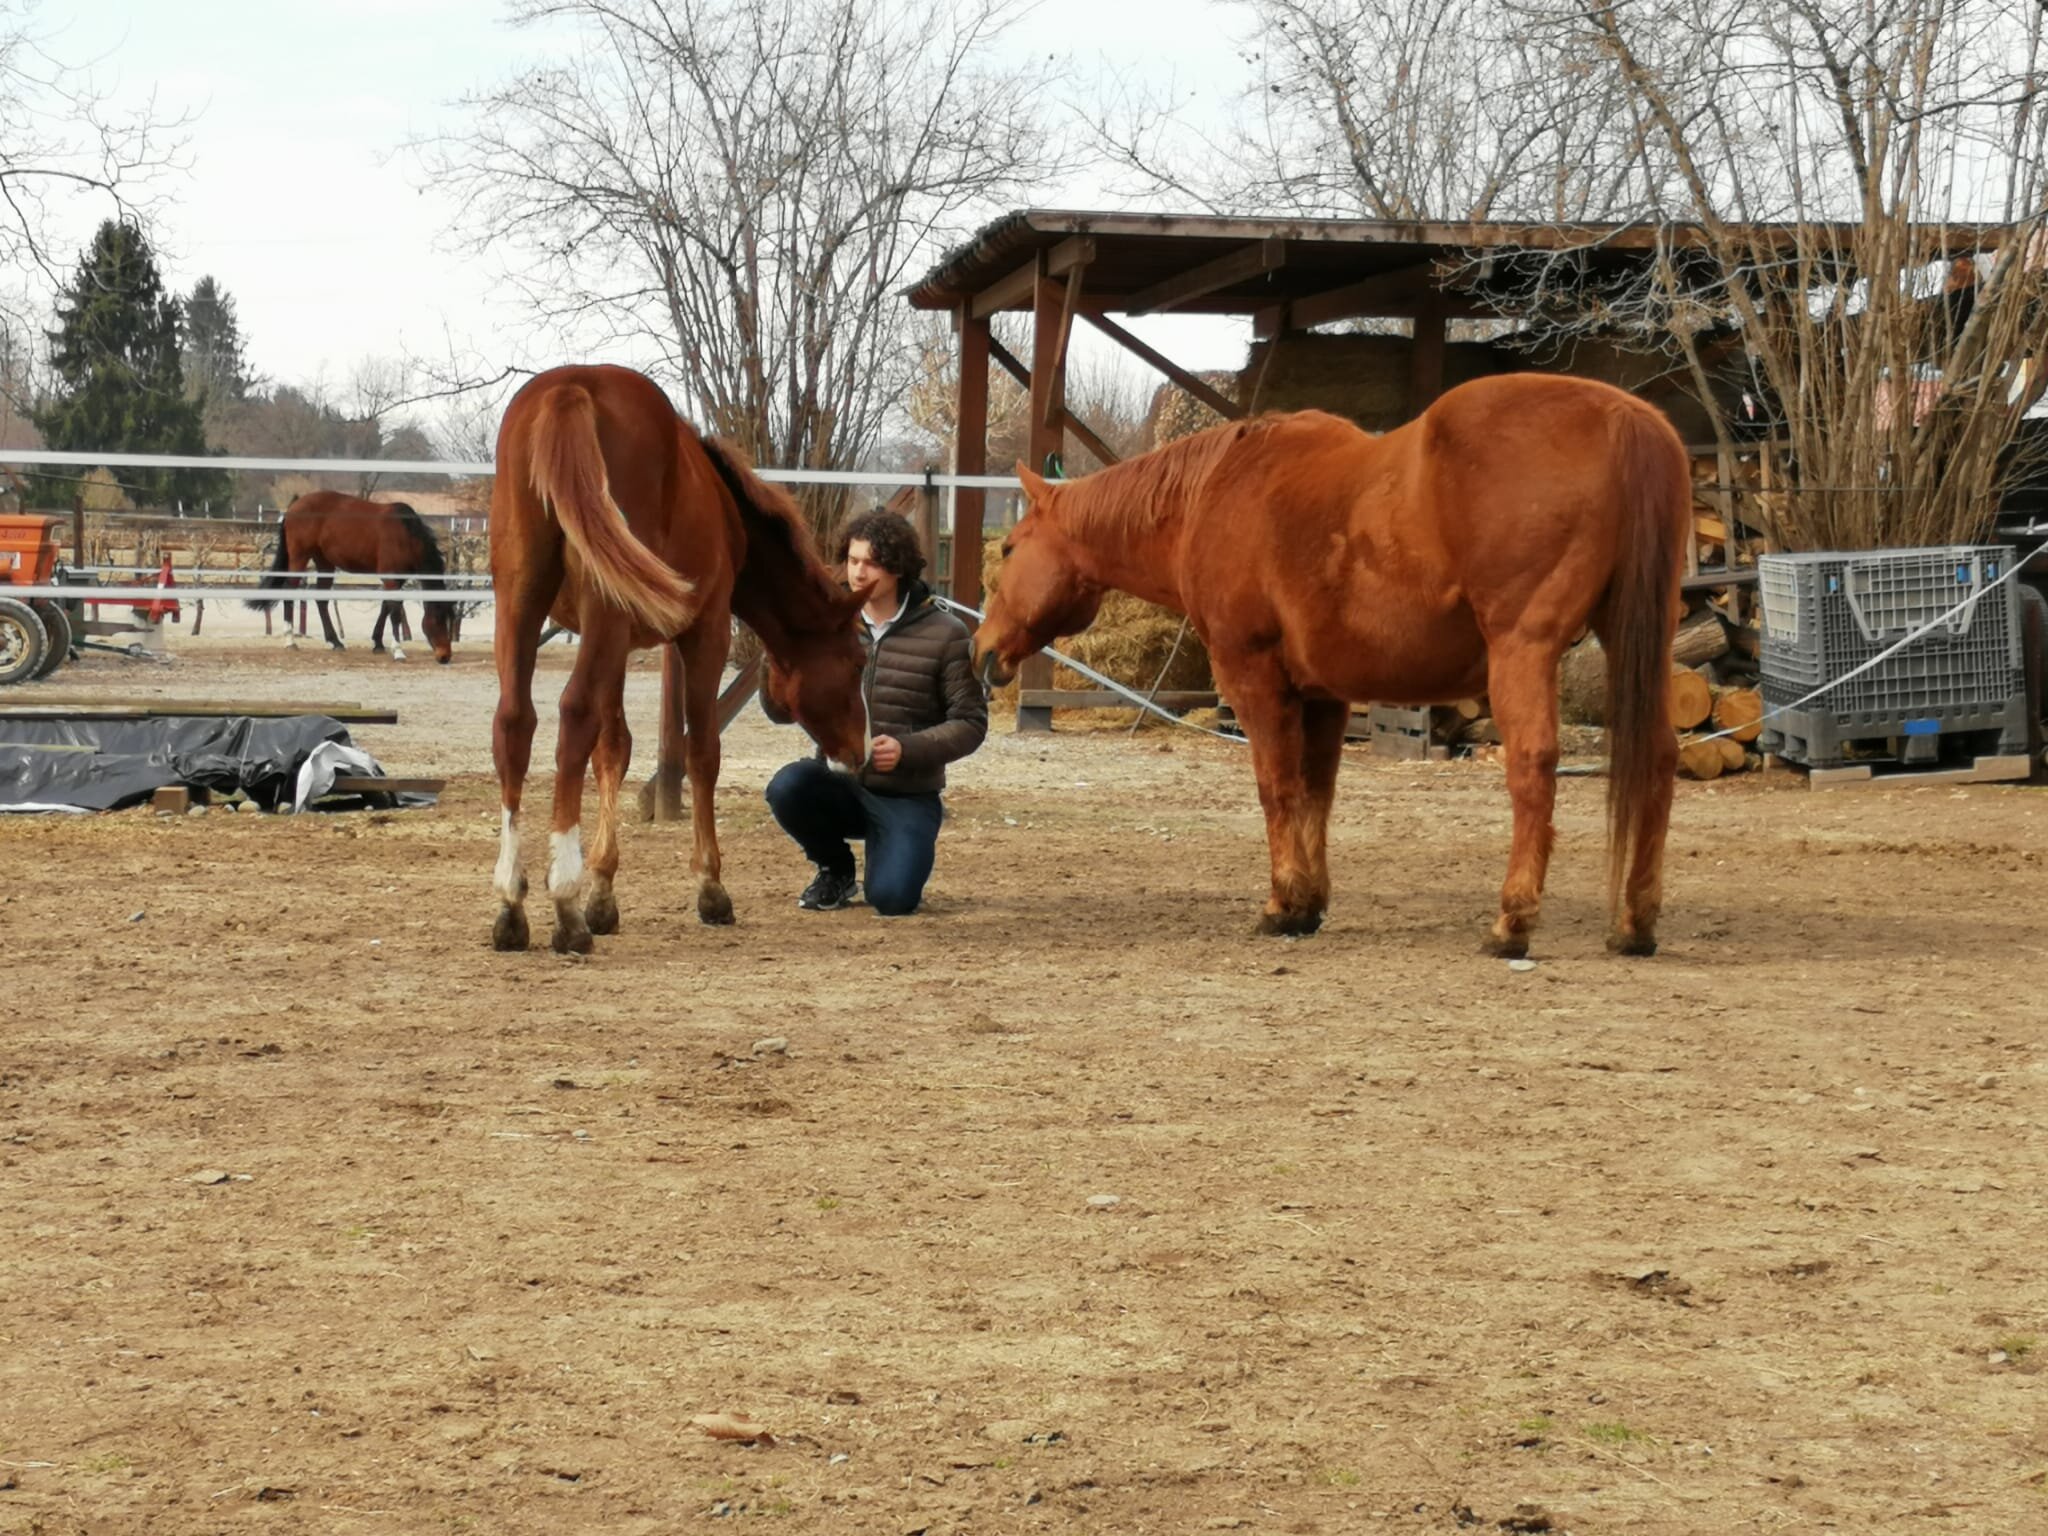   PICTURED:  The horse on the left is Cobalto, the horse that likes me the most on the farm - perhaps because he likes everyone. 